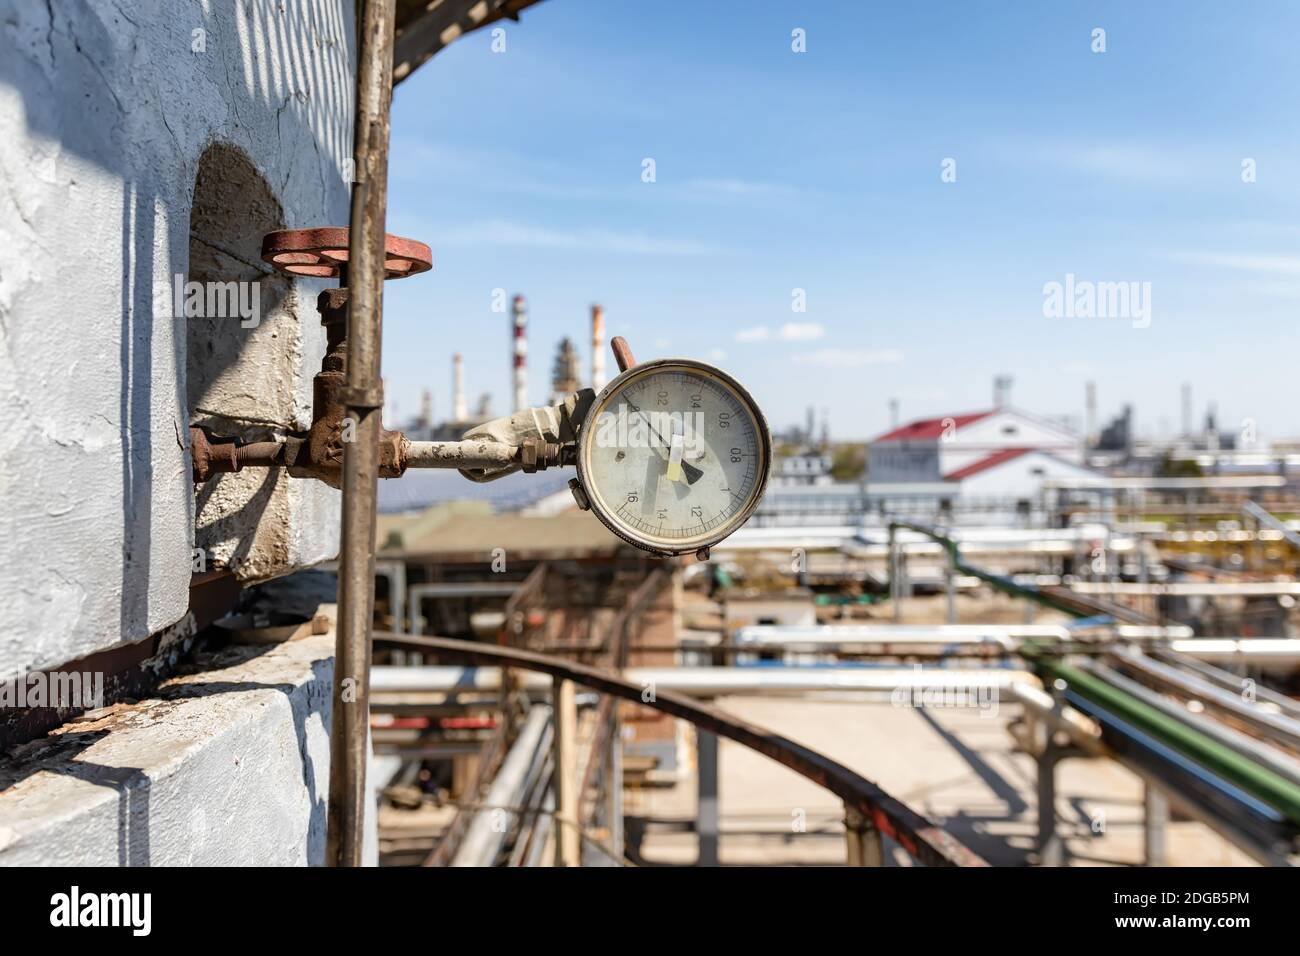 Properly working pressure gauge installed on the pipeline at the old chemical plant Stock Photo